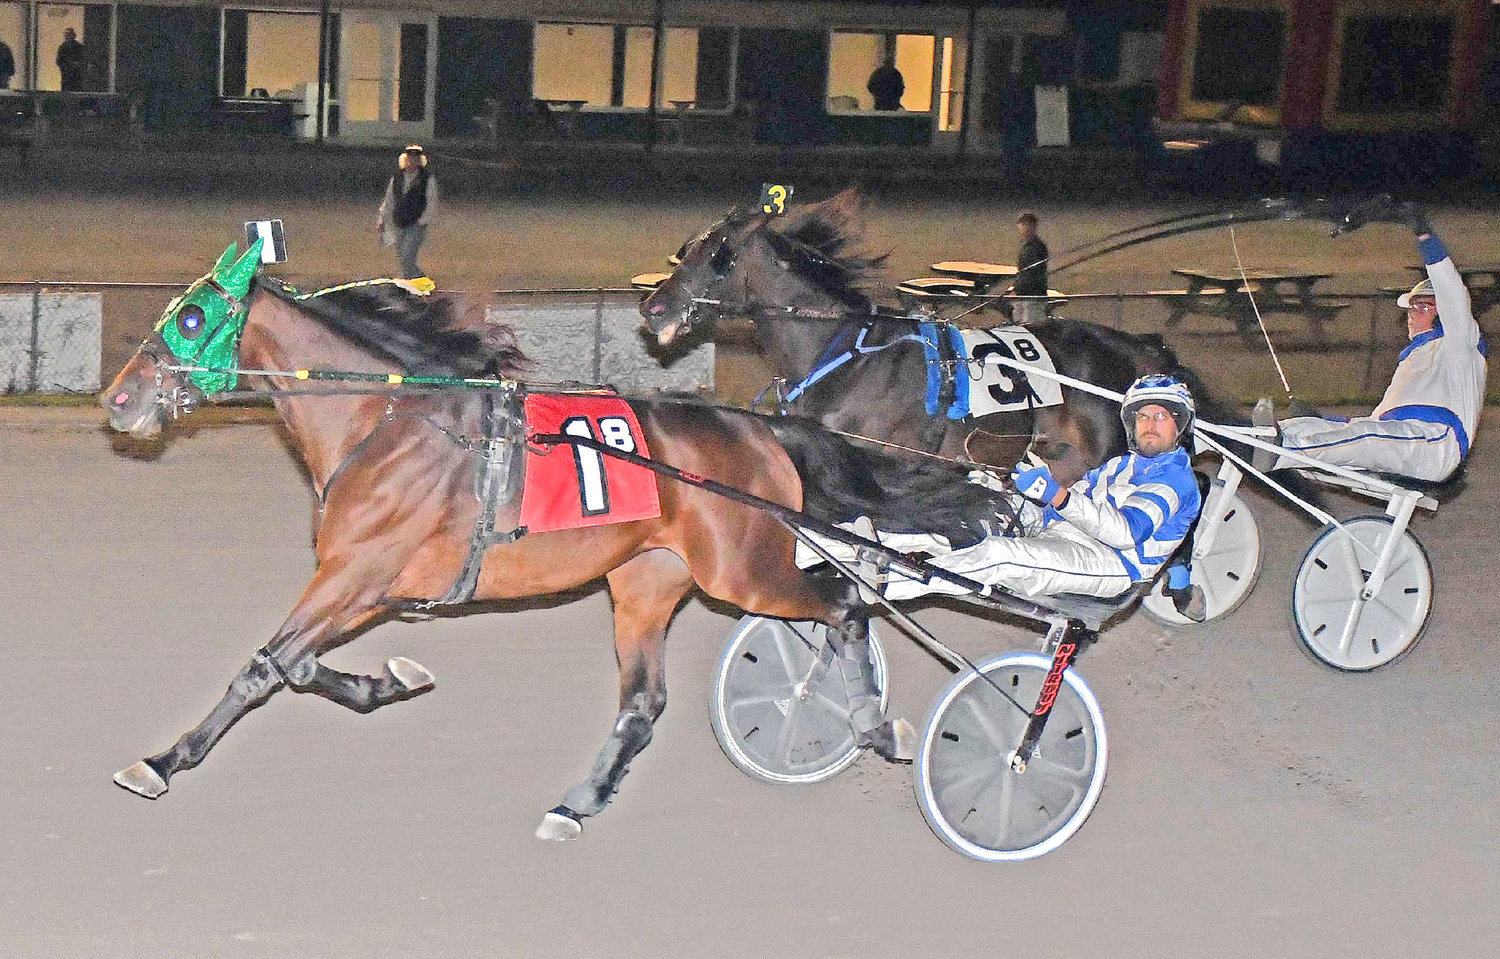 Ongoing Royalty and driver Steeven Genois won the featured $7,500 trot at Vernon Downs on Saturday. It was the horse's fourth straight win, and come in 1:55.1.